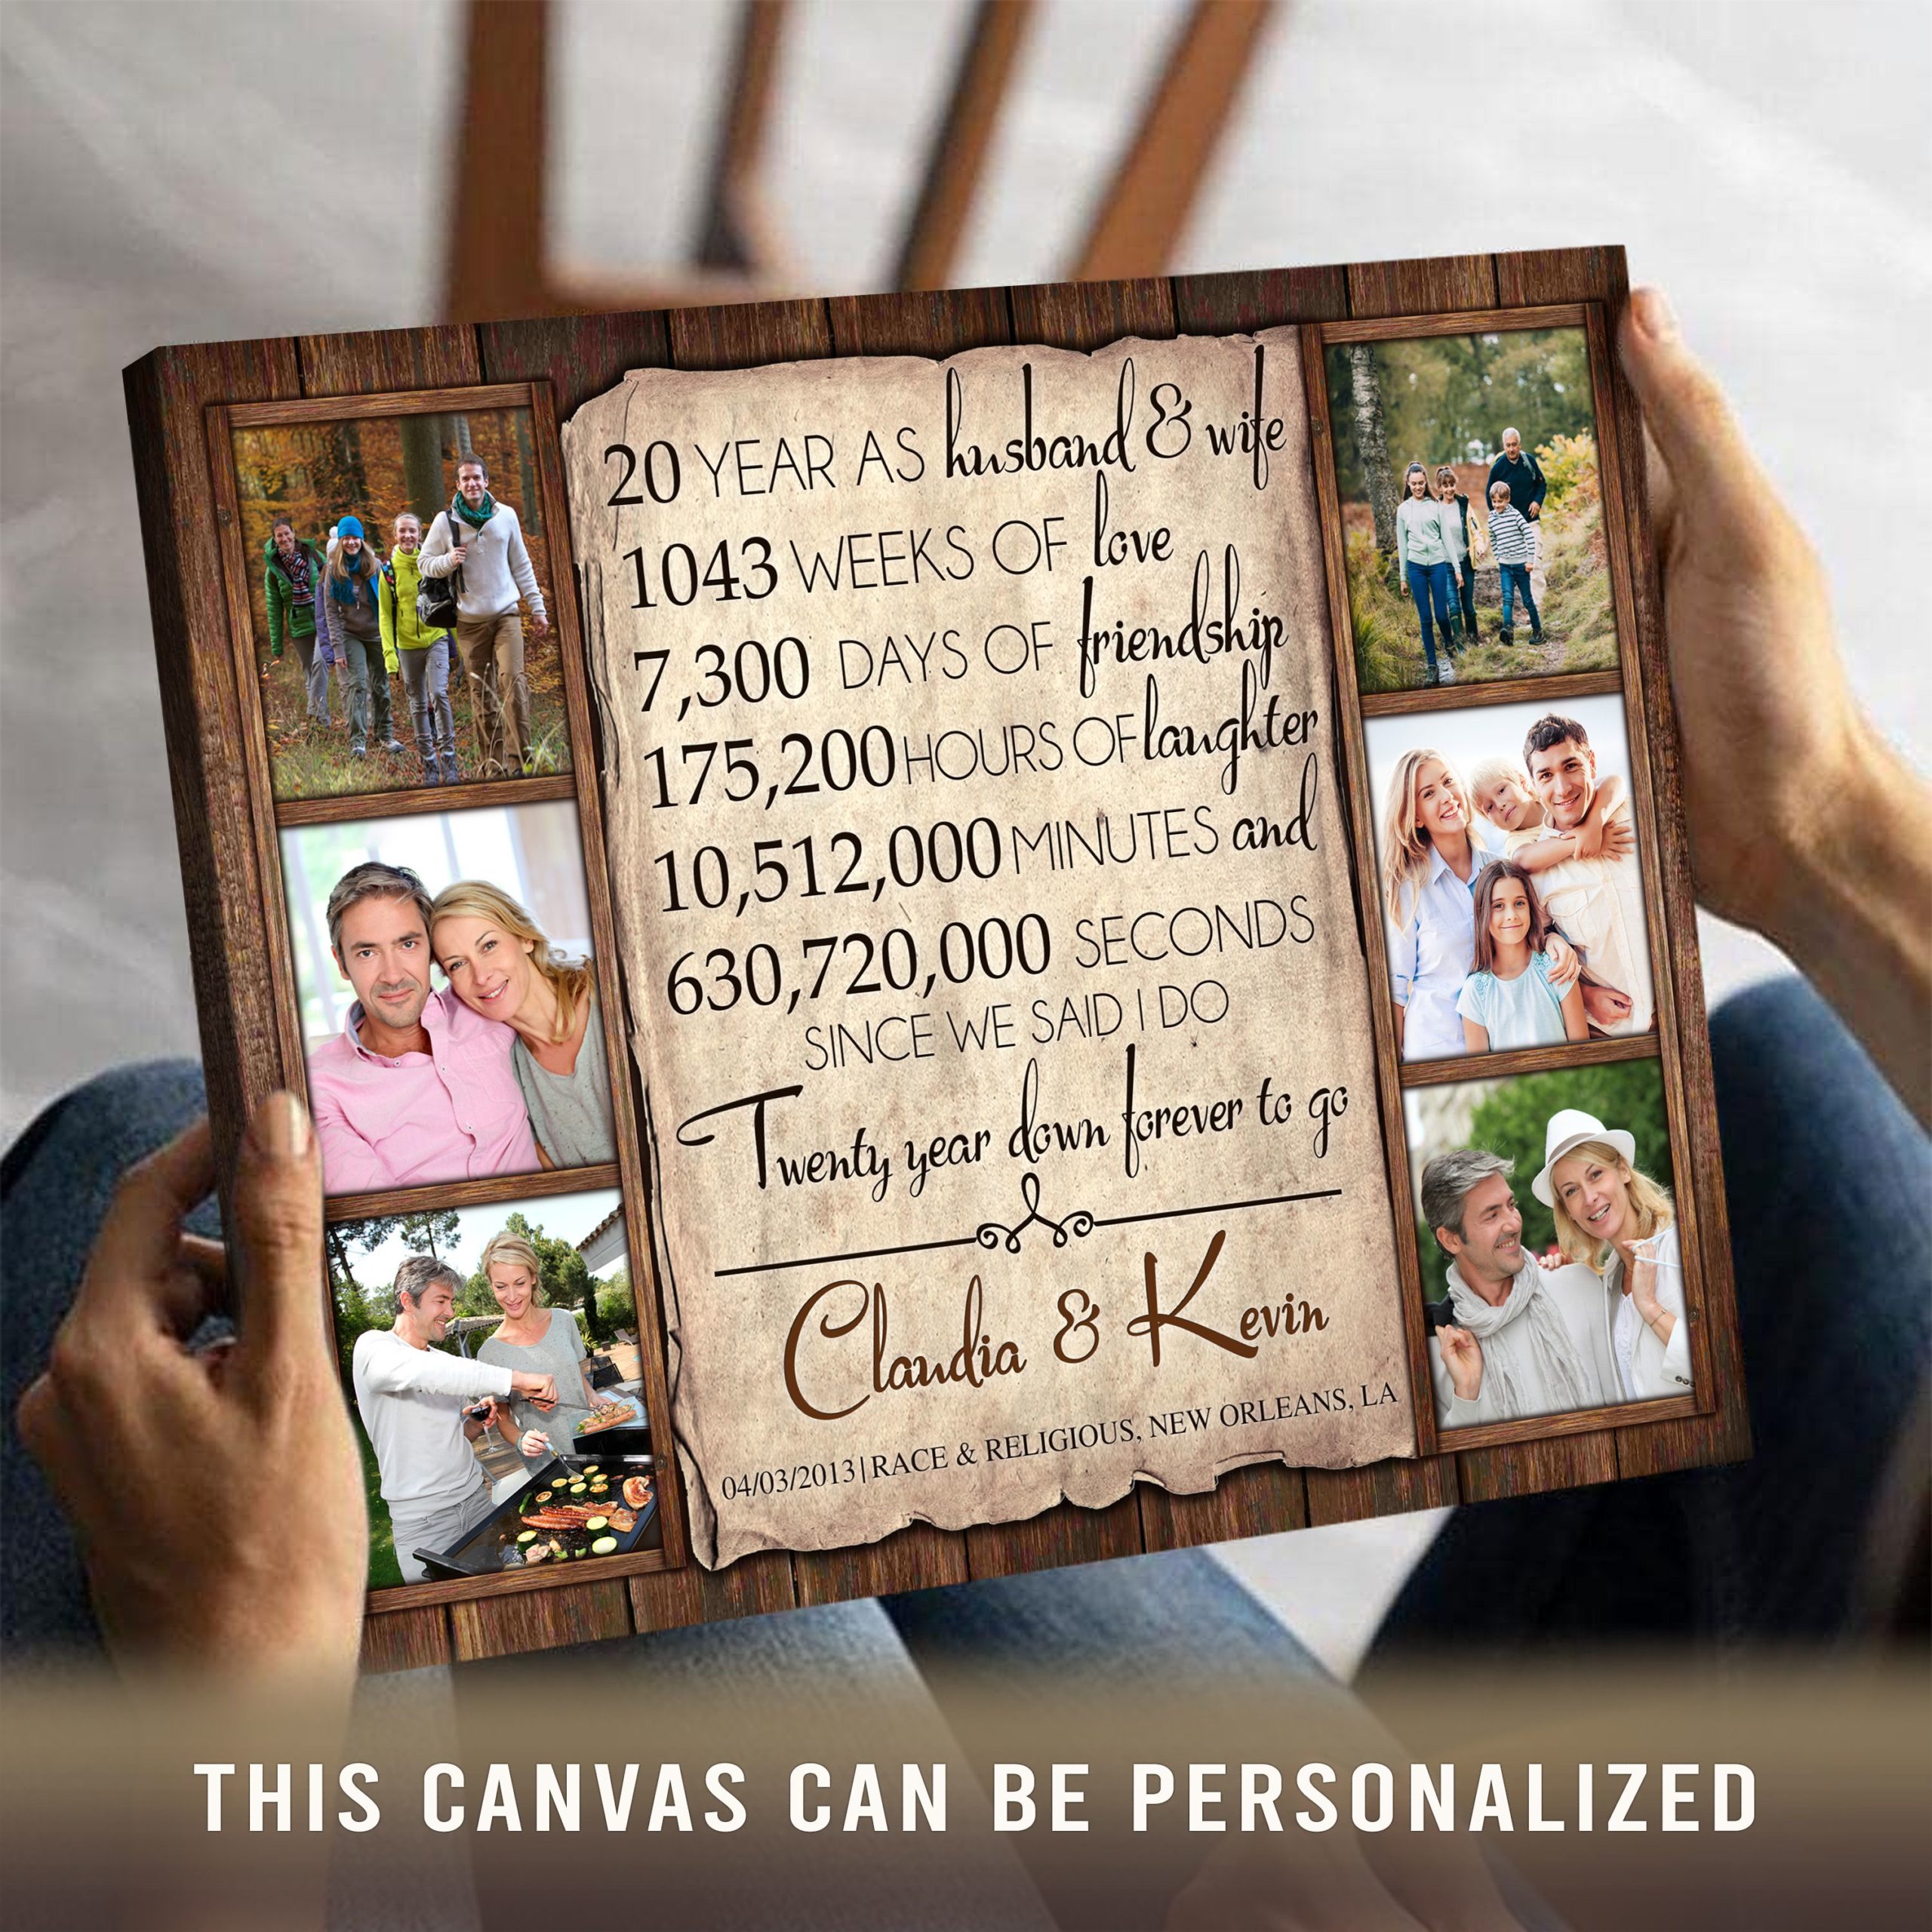 Personalized 25 Years Anniversary Photo Canvas, 25th Wedding Anniversary  Gifts For Wife, 25 Year Of Marriage Gift - Best Personalized Gifts For  Everyone